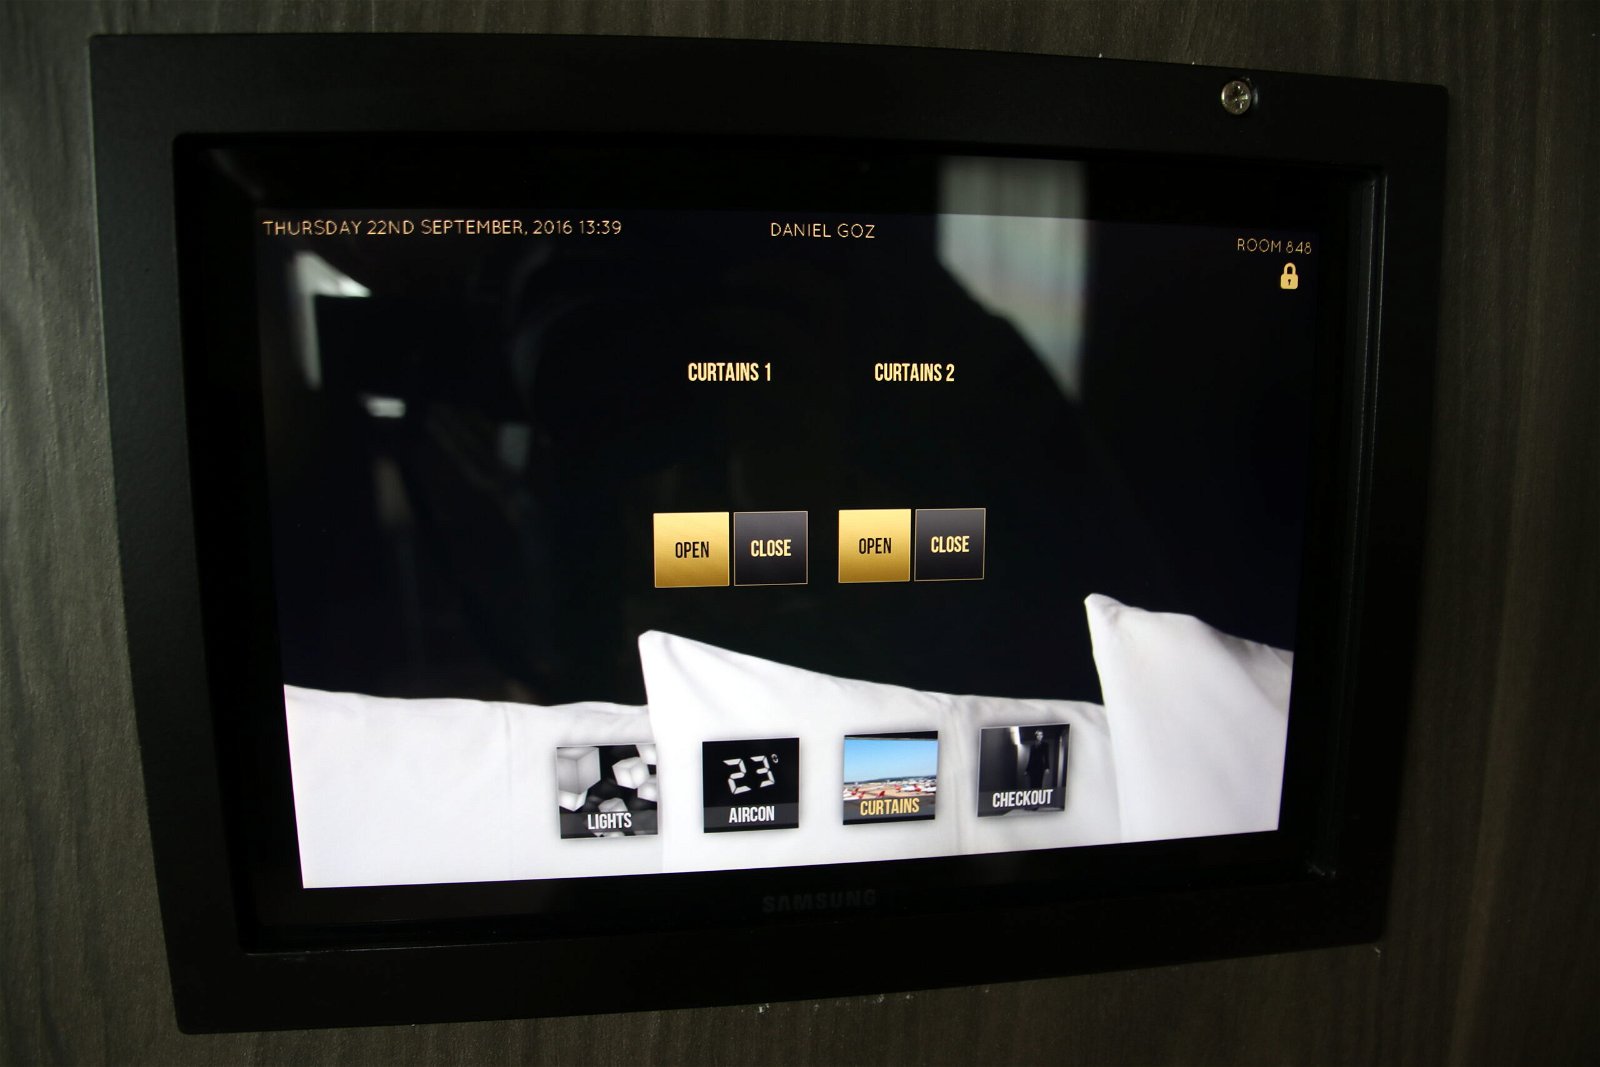 The in room tablet that controls lighting and check out.